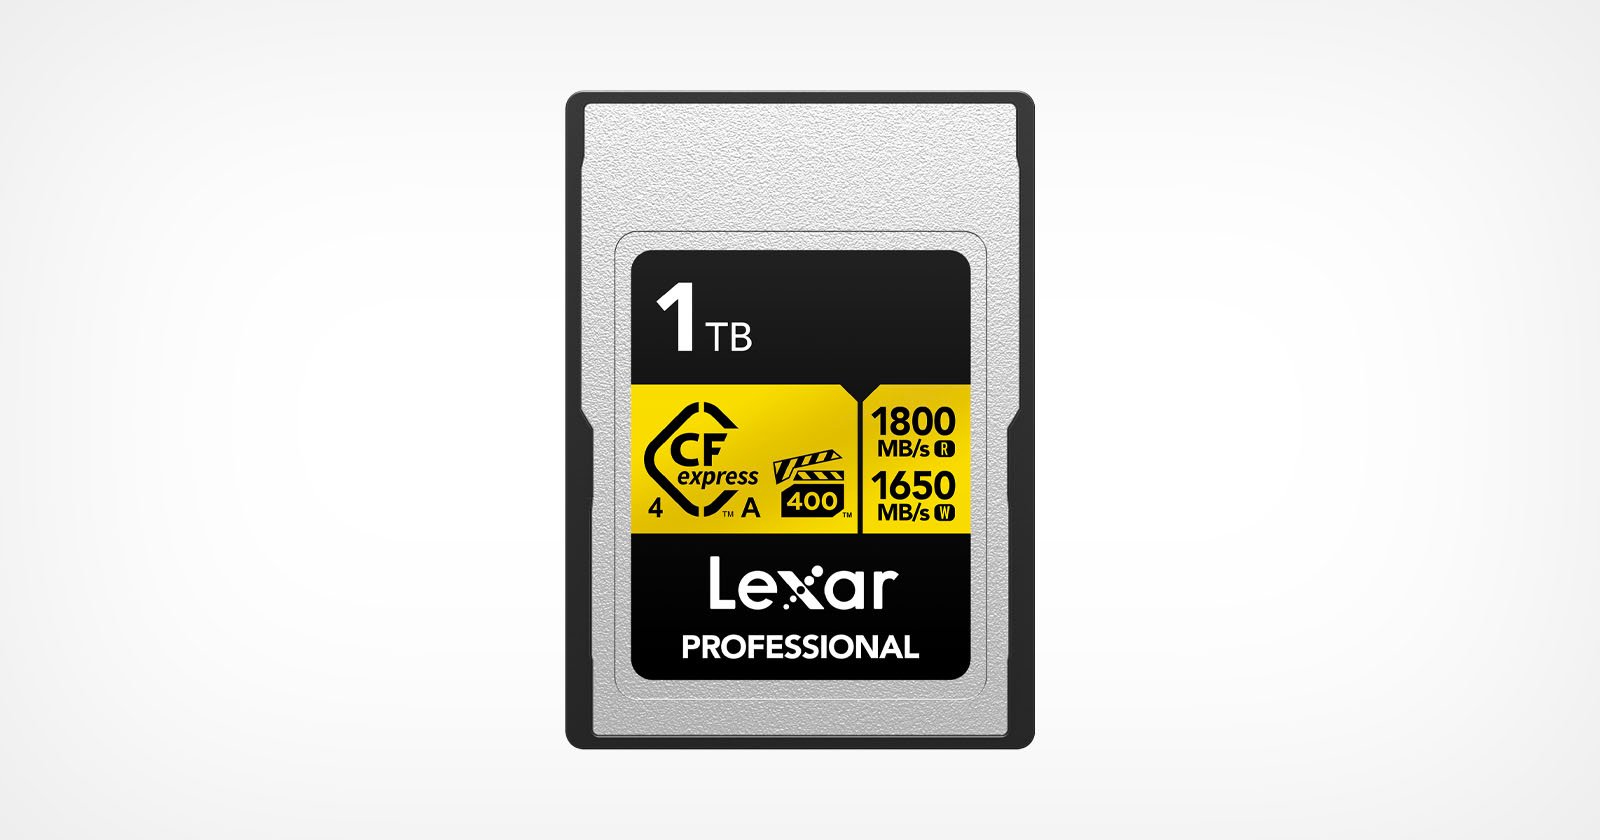 Lexar is the First to Release a Next-Gen CFe 4.0 Card for Sony Cameras